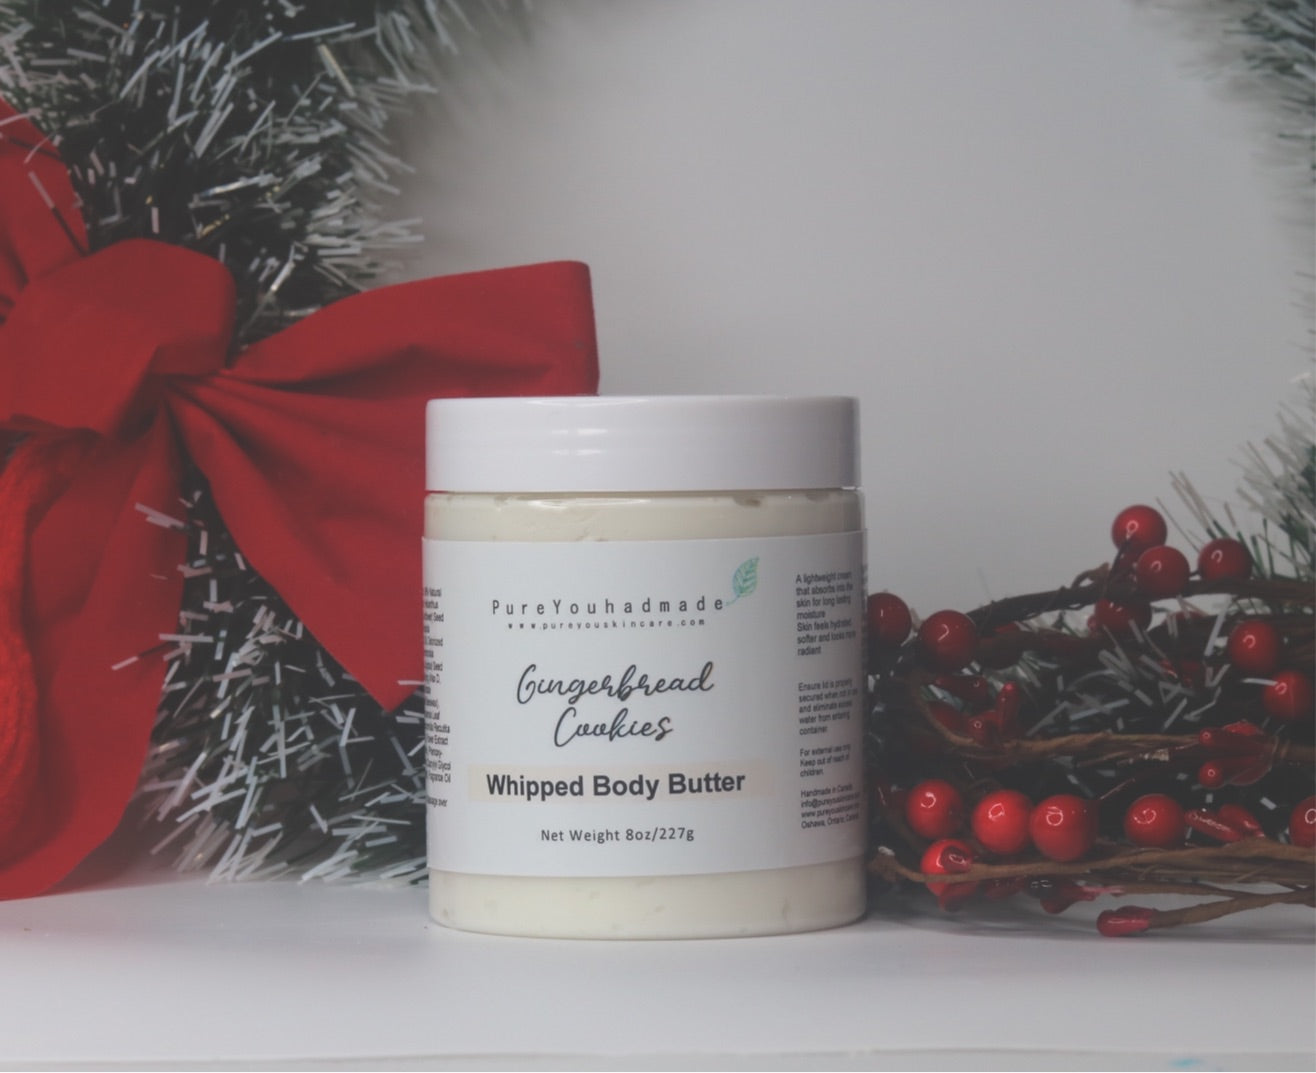 Gingerbread Cookies Whipped Body Butter